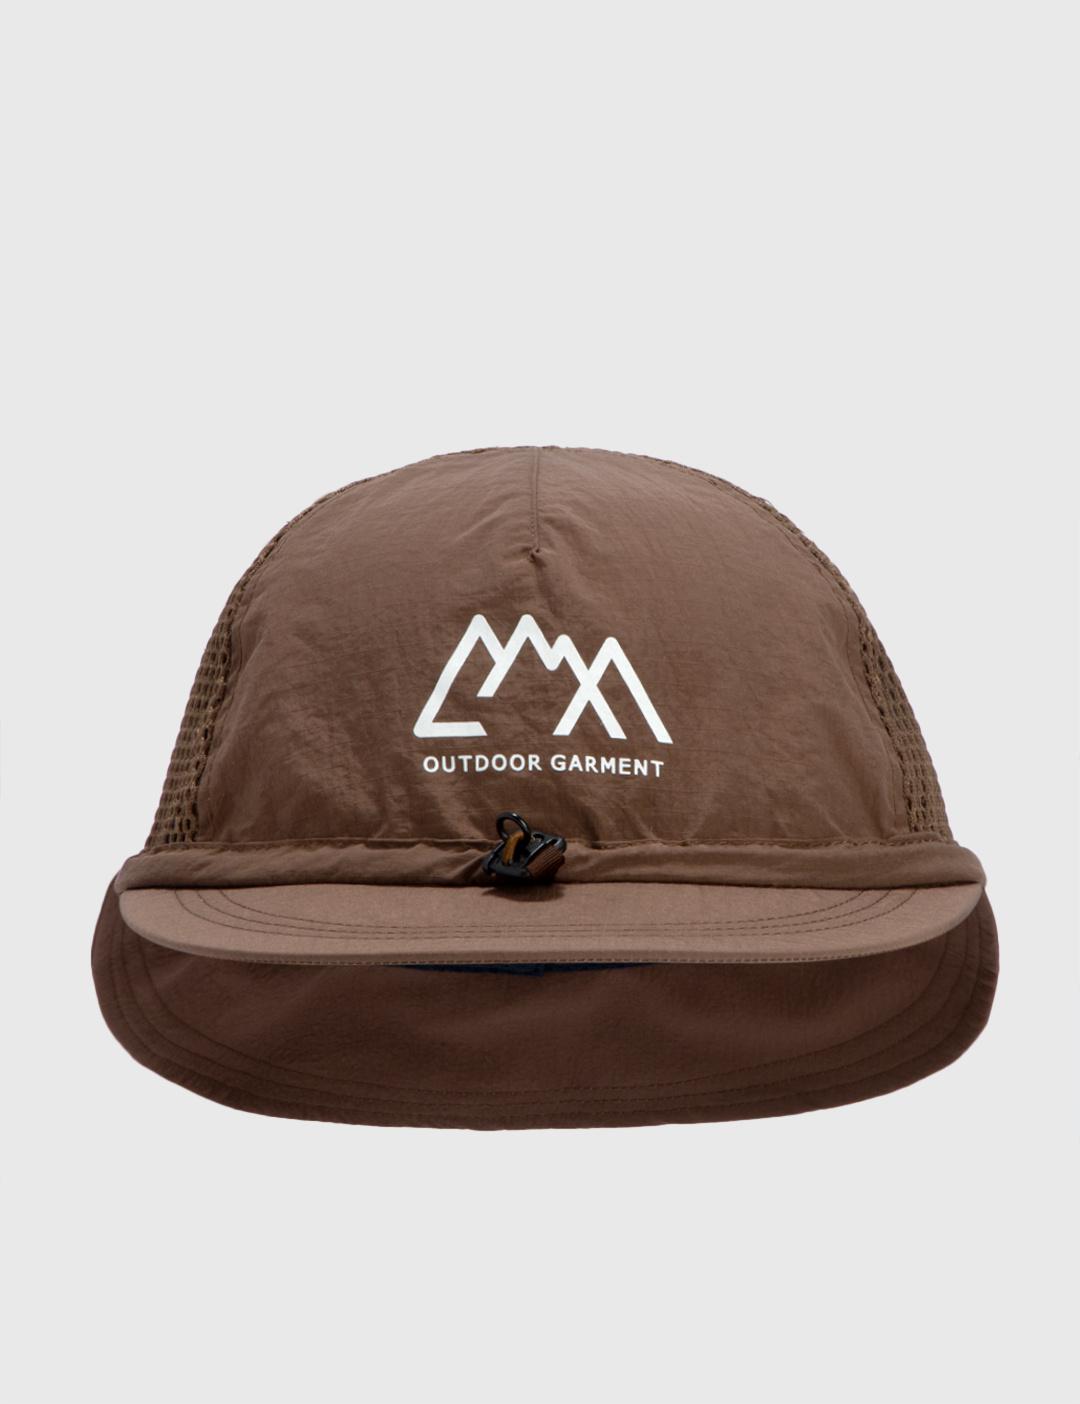 ALL TIME CAP by COMFY OUTDOOR GARMENT